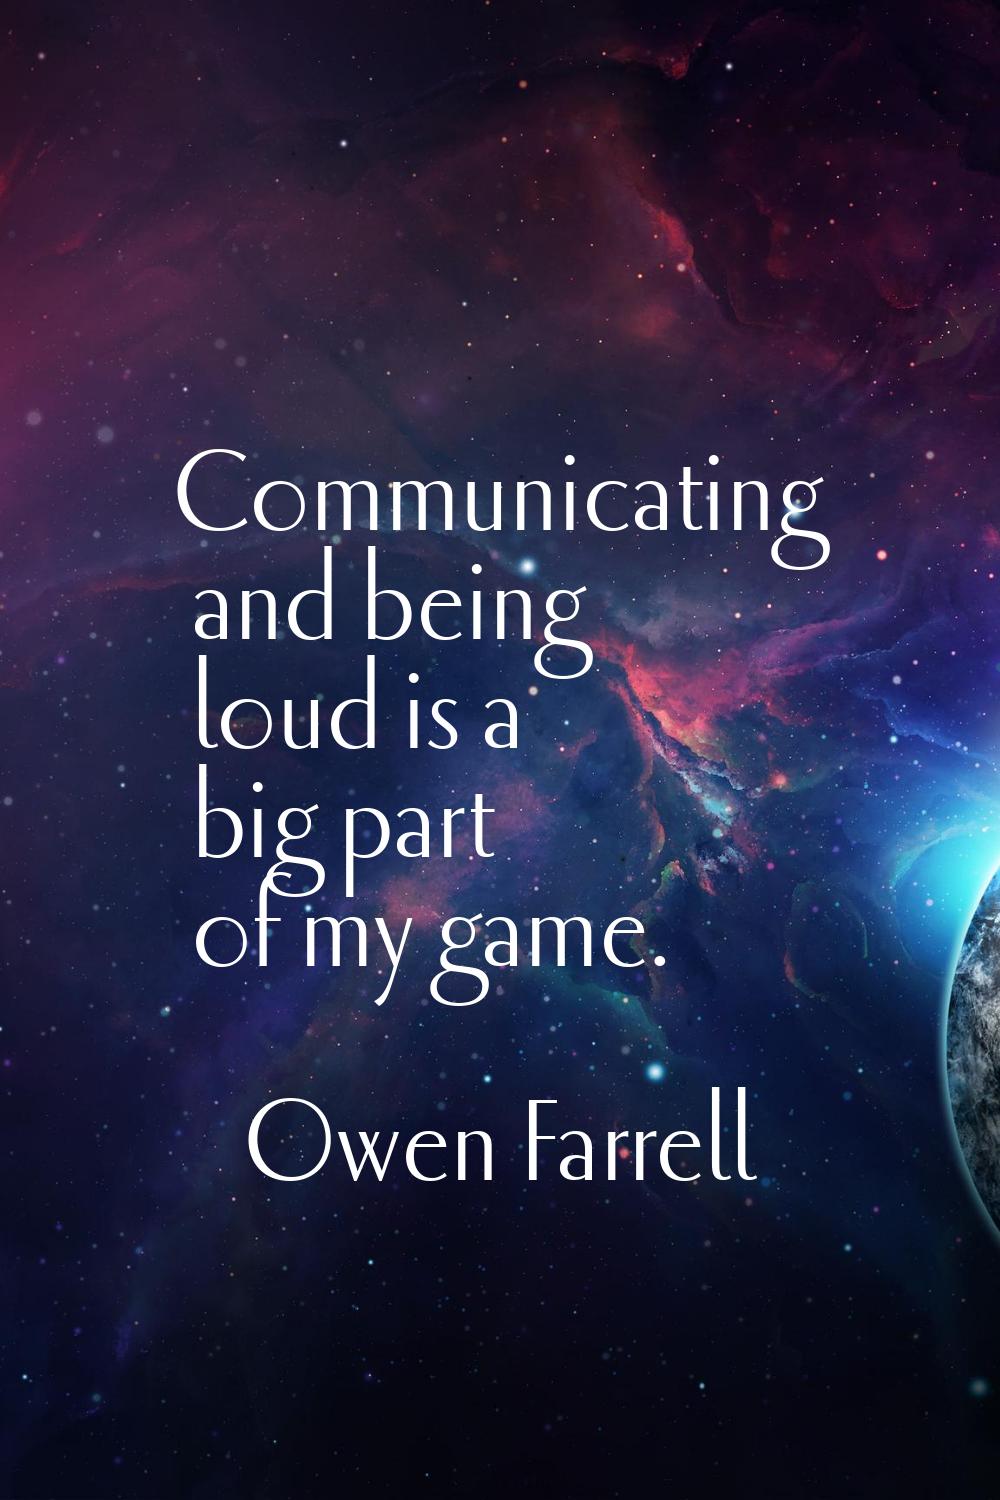 Communicating and being loud is a big part of my game.